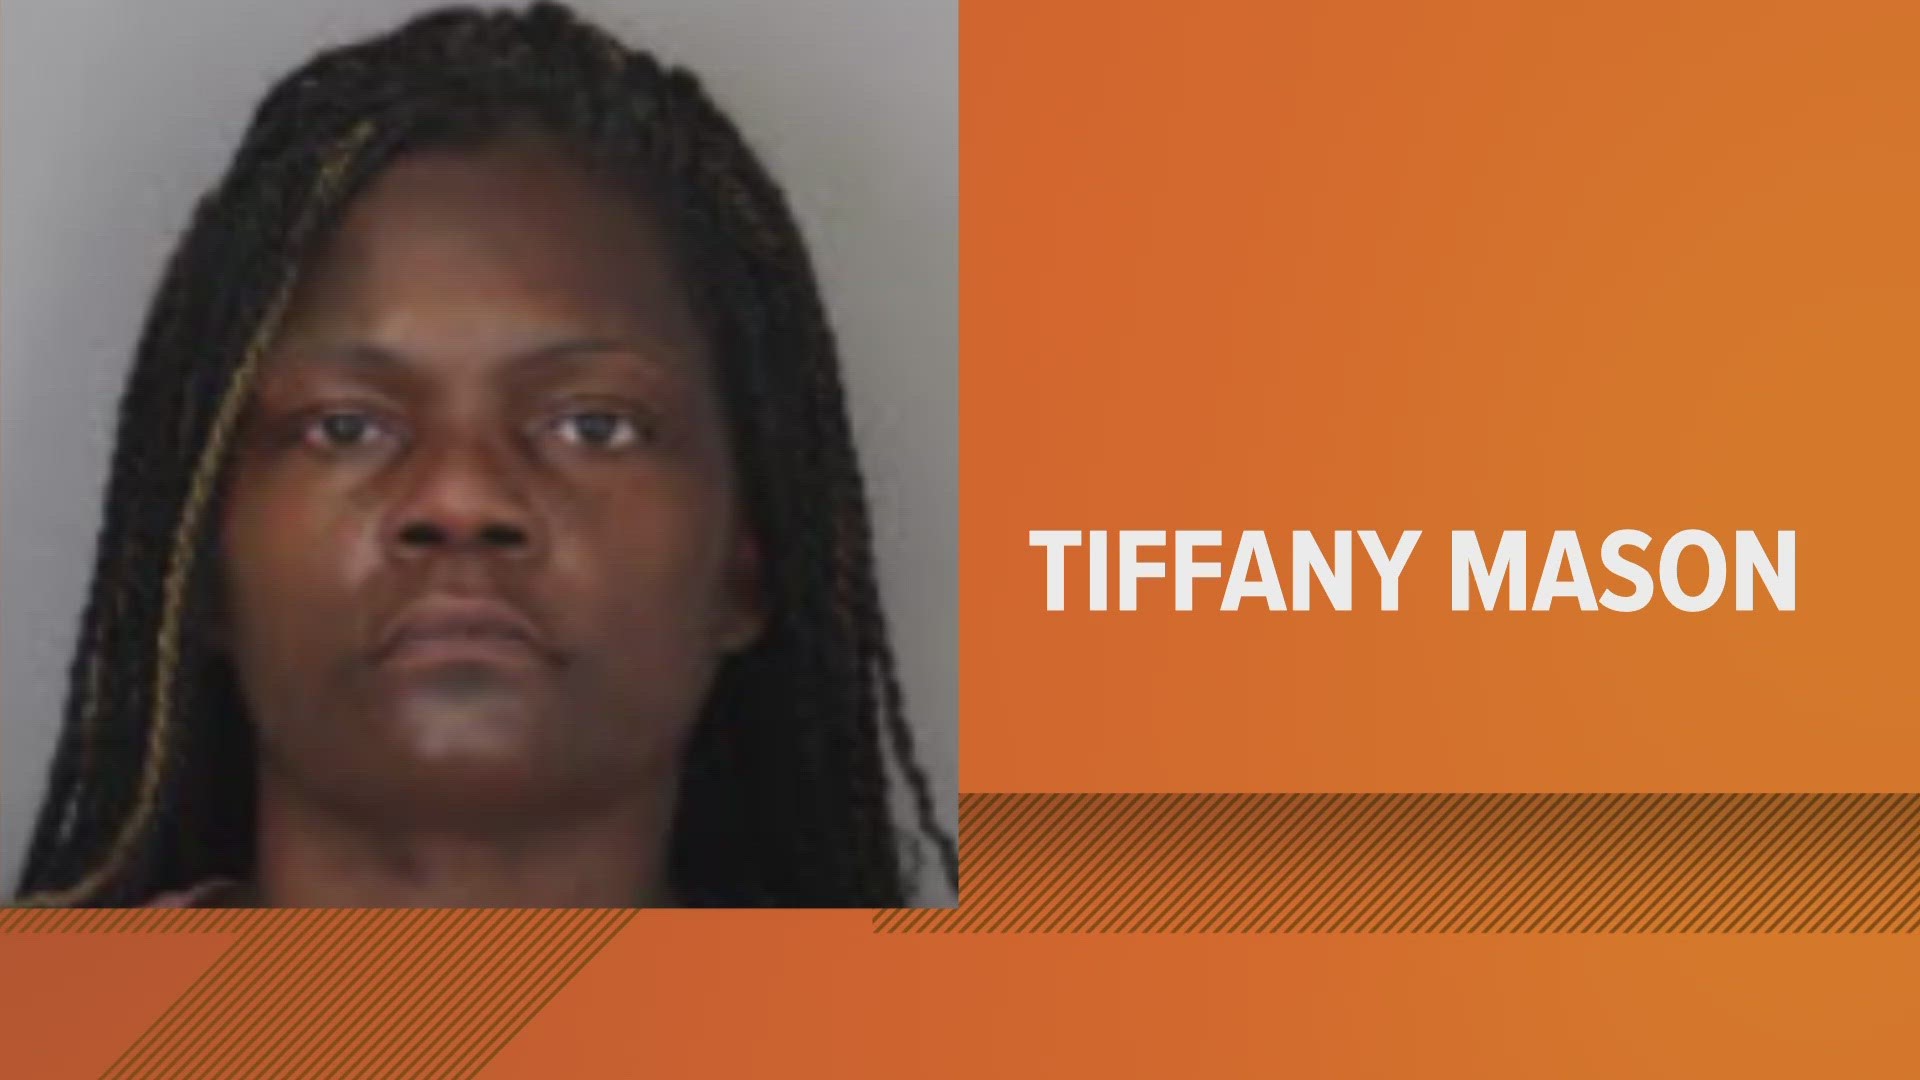 Tiffany Mason fired shots at her neighbor’s residence while six adults and four children aged 15 and under were inside, the affidavit said.